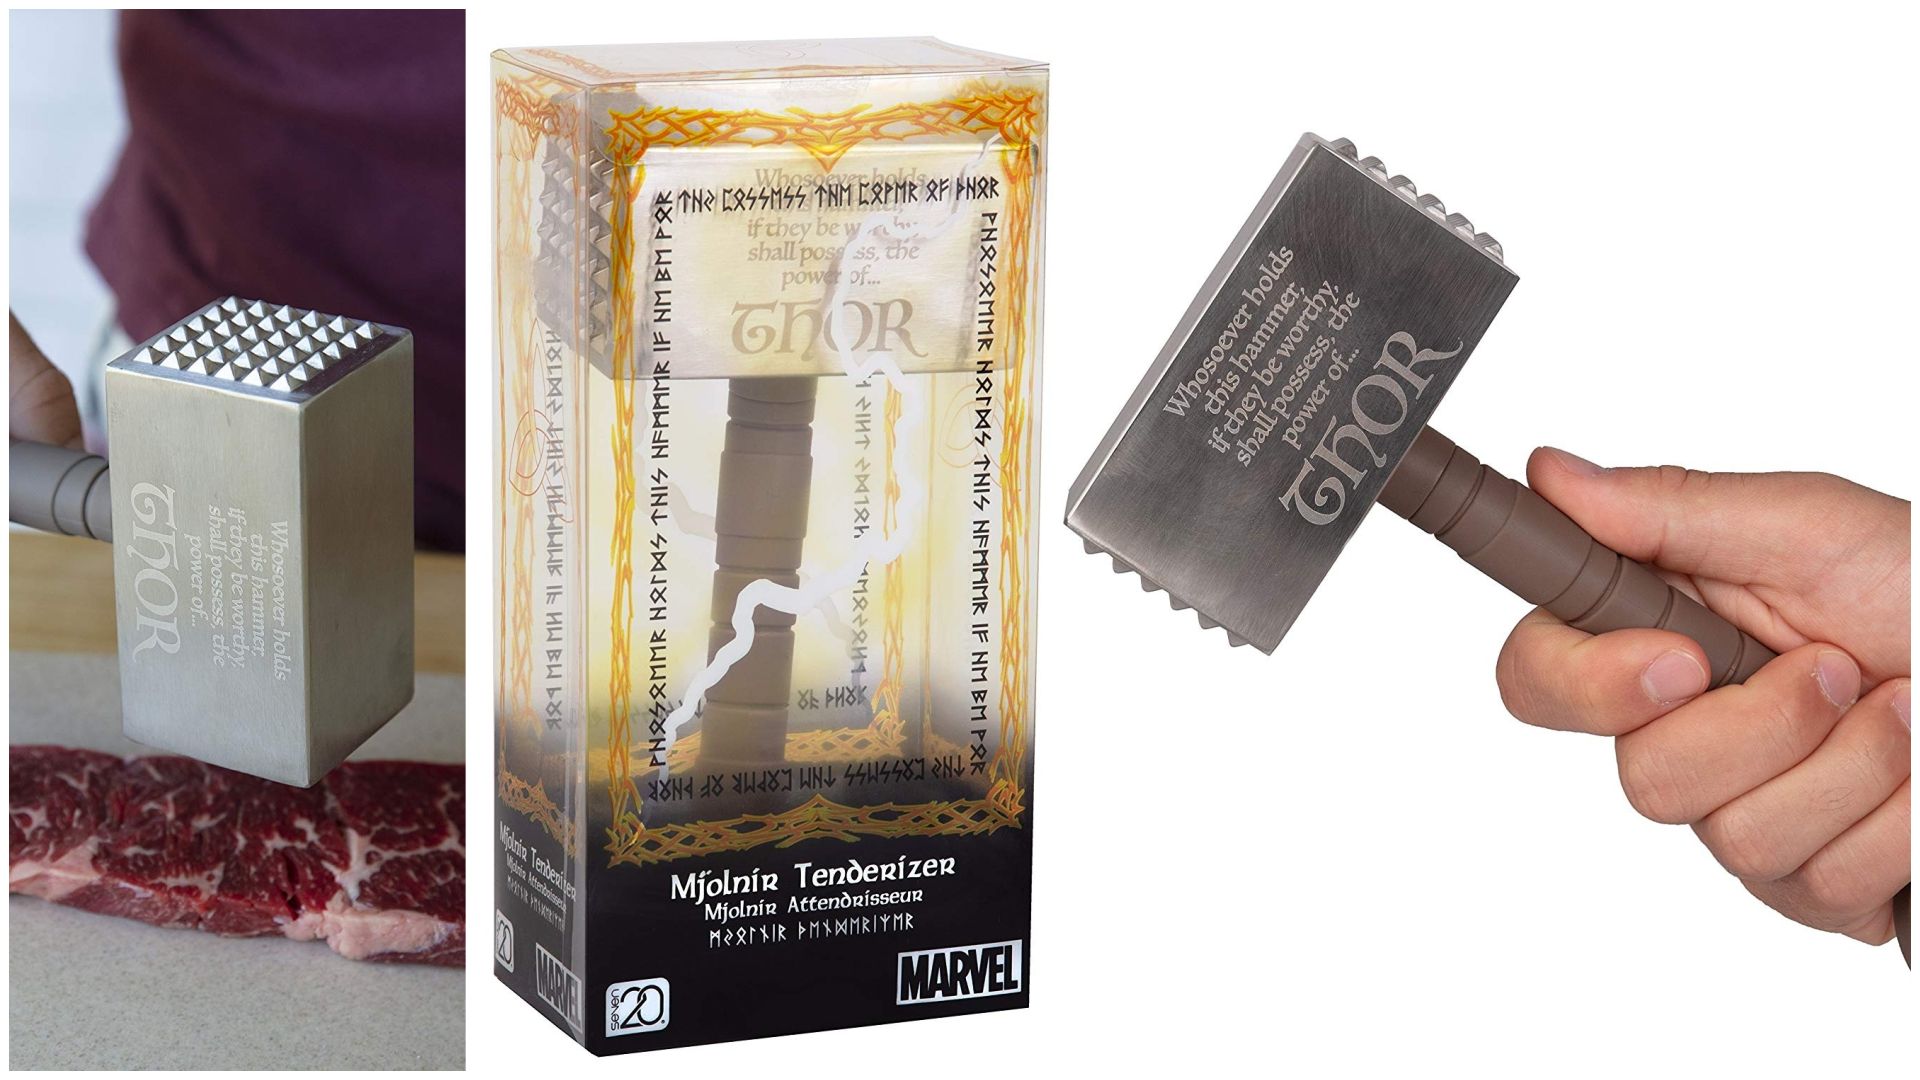 THOR MEAT TENDERIZER